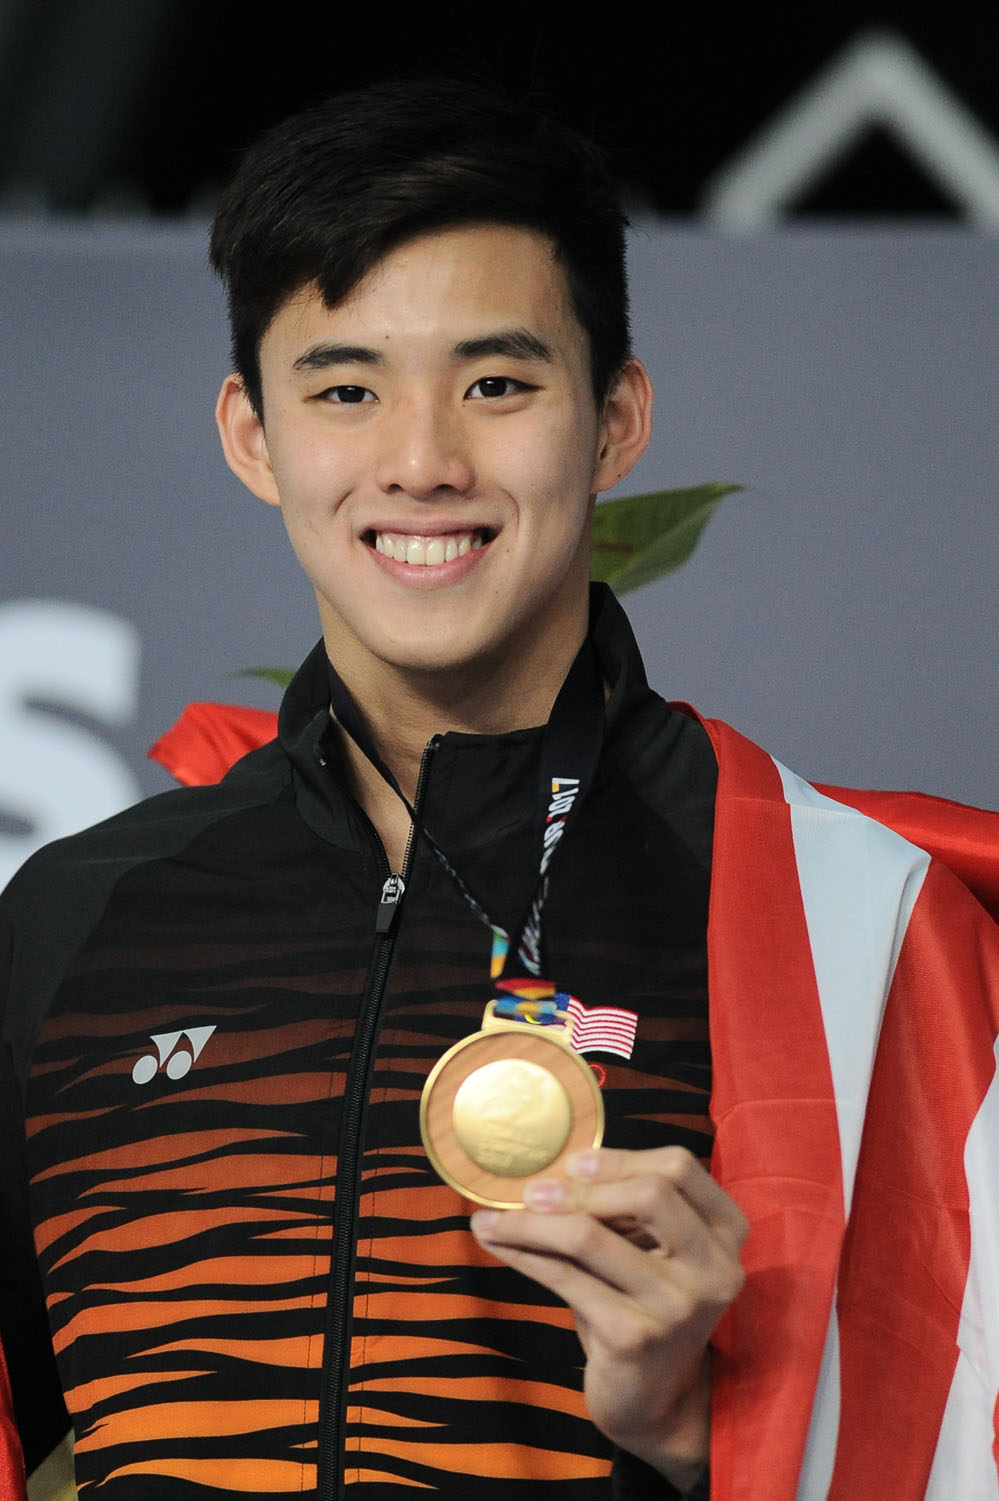 29th SEA Games KL2017 Swimming 400m Freestyle Men - Gold Medal - Welson Wee Sheng Sim